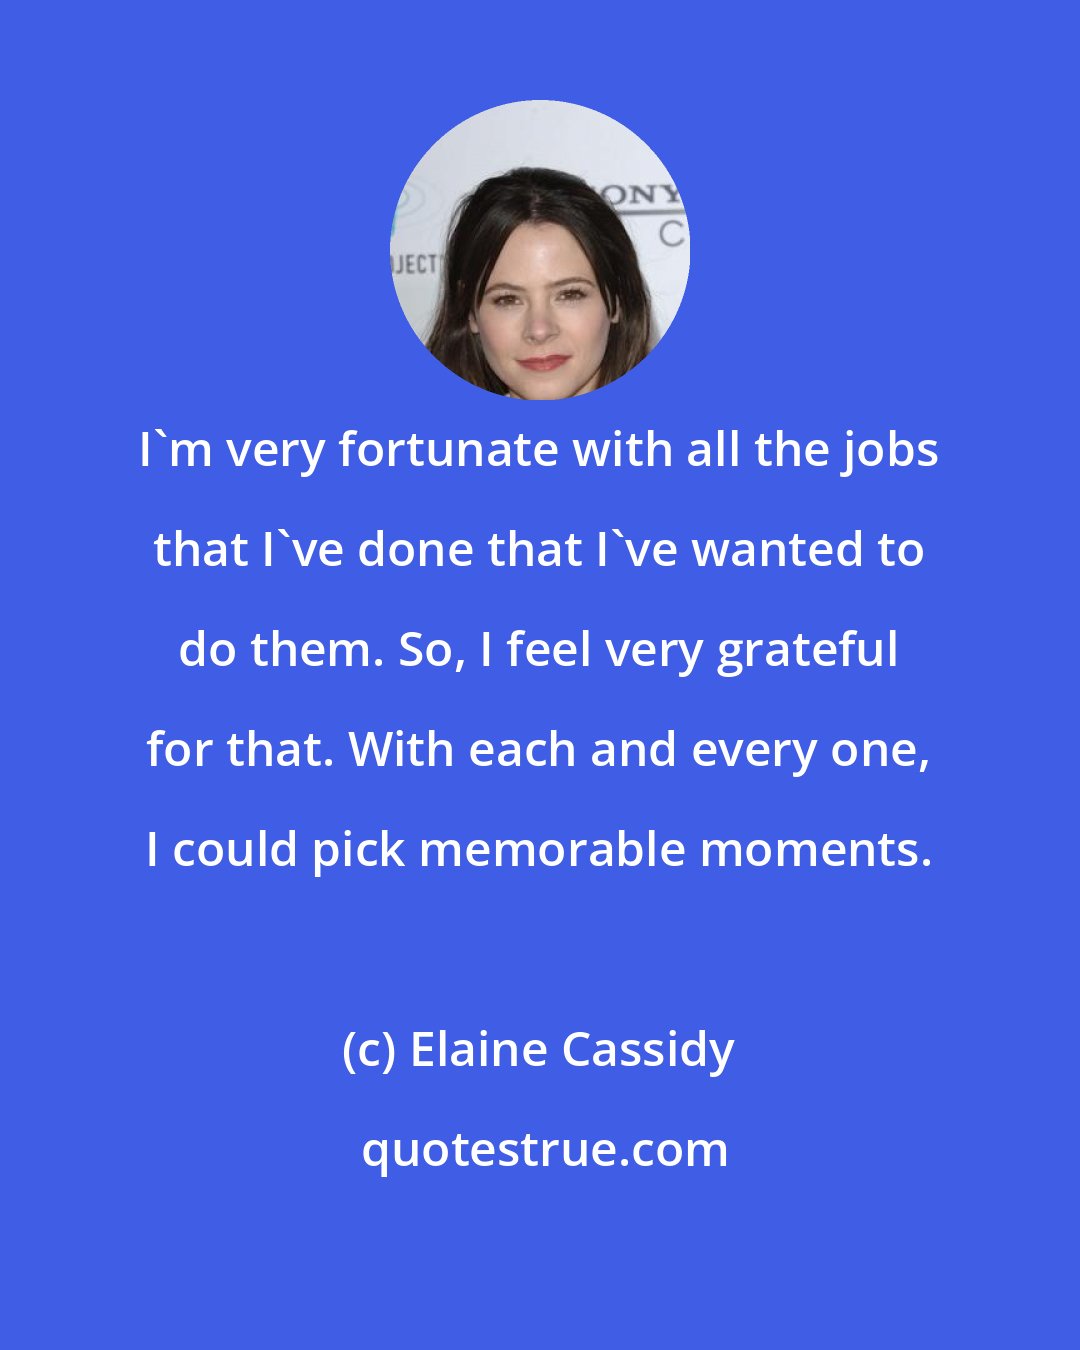 Elaine Cassidy: I'm very fortunate with all the jobs that I've done that I've wanted to do them. So, I feel very grateful for that. With each and every one, I could pick memorable moments.